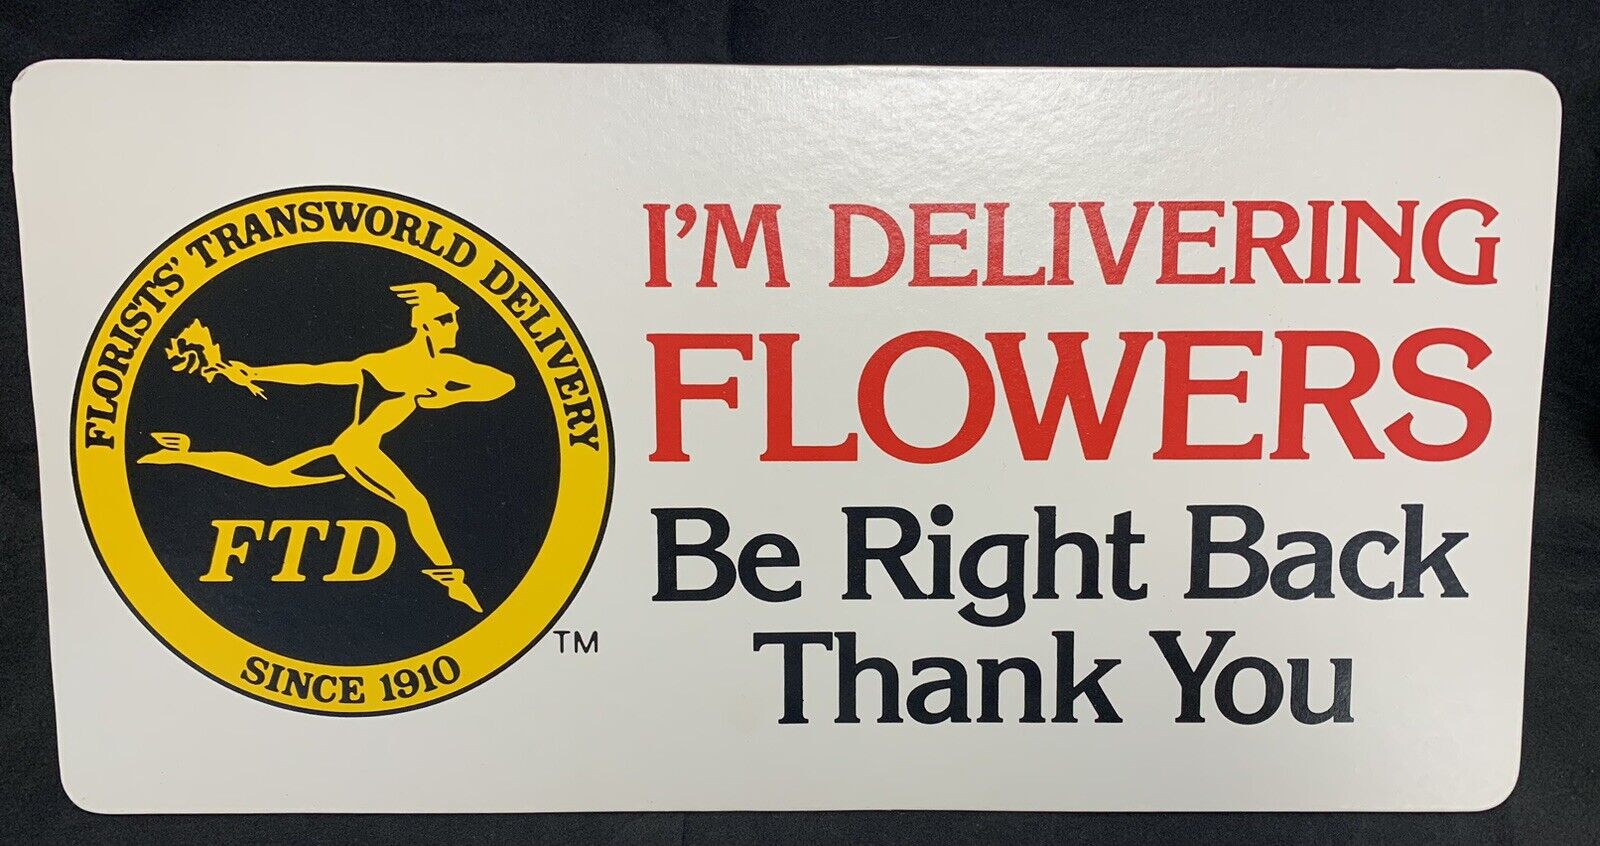 VTG FTD Florist Delivery Sign Be Right Back - Backside Driver Suggestions 14x7